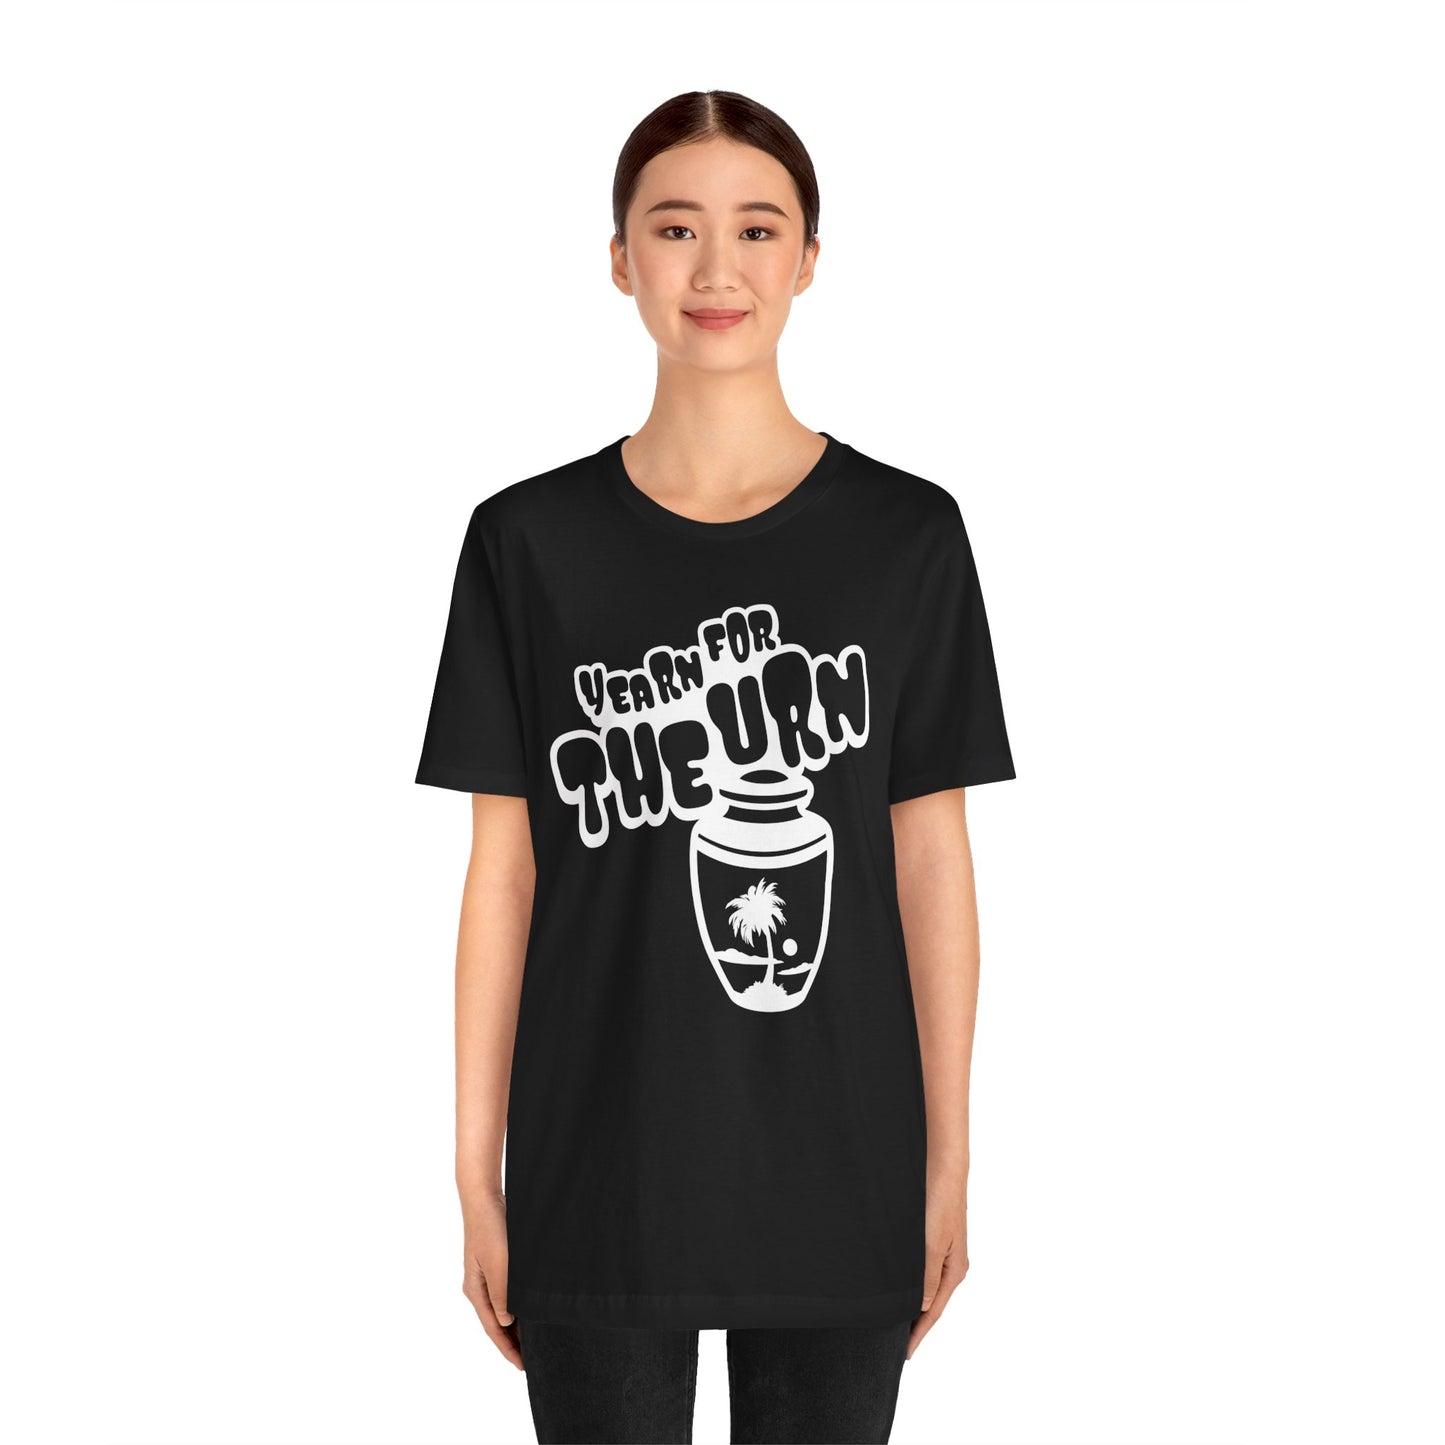 Yearn for the Urn Unisex T-shirt